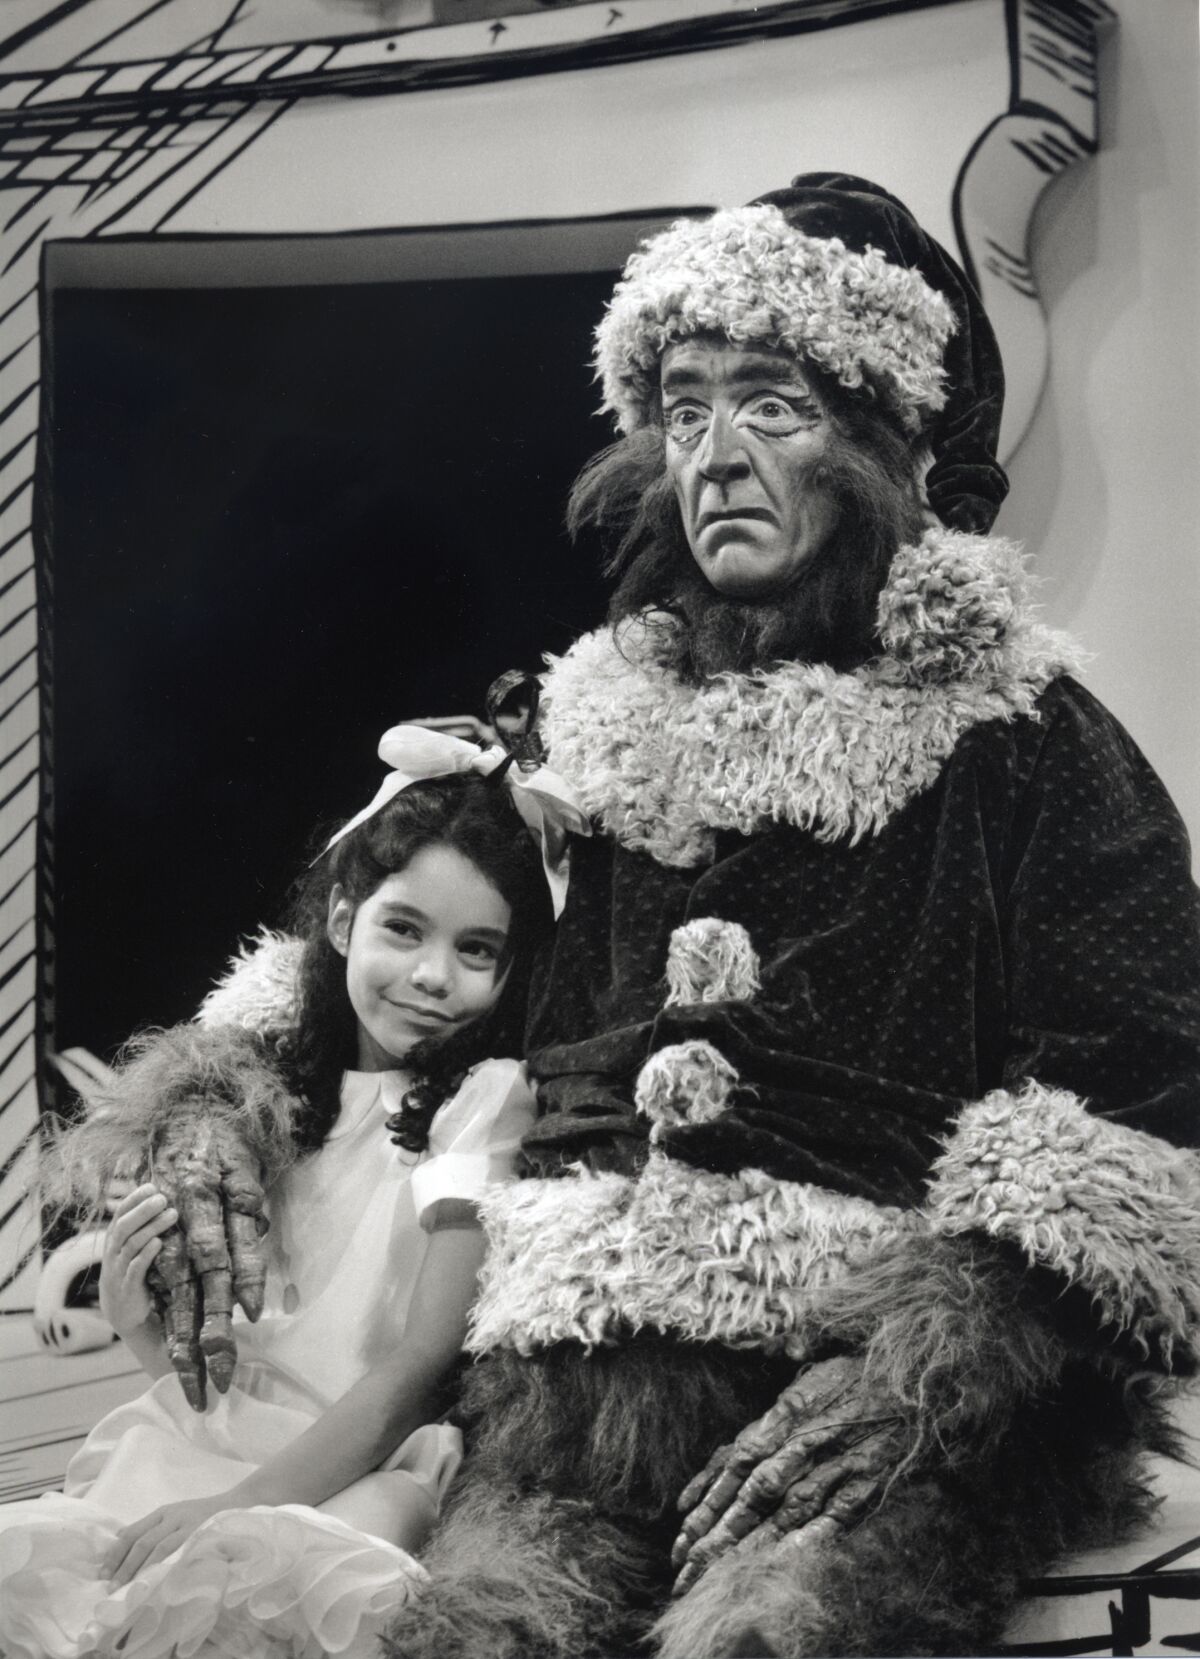 Actor Guy Paul, right, and Vanessa Hudgens in "Dr. Seuss's How the Grinch Stole Christmas" in 1998.